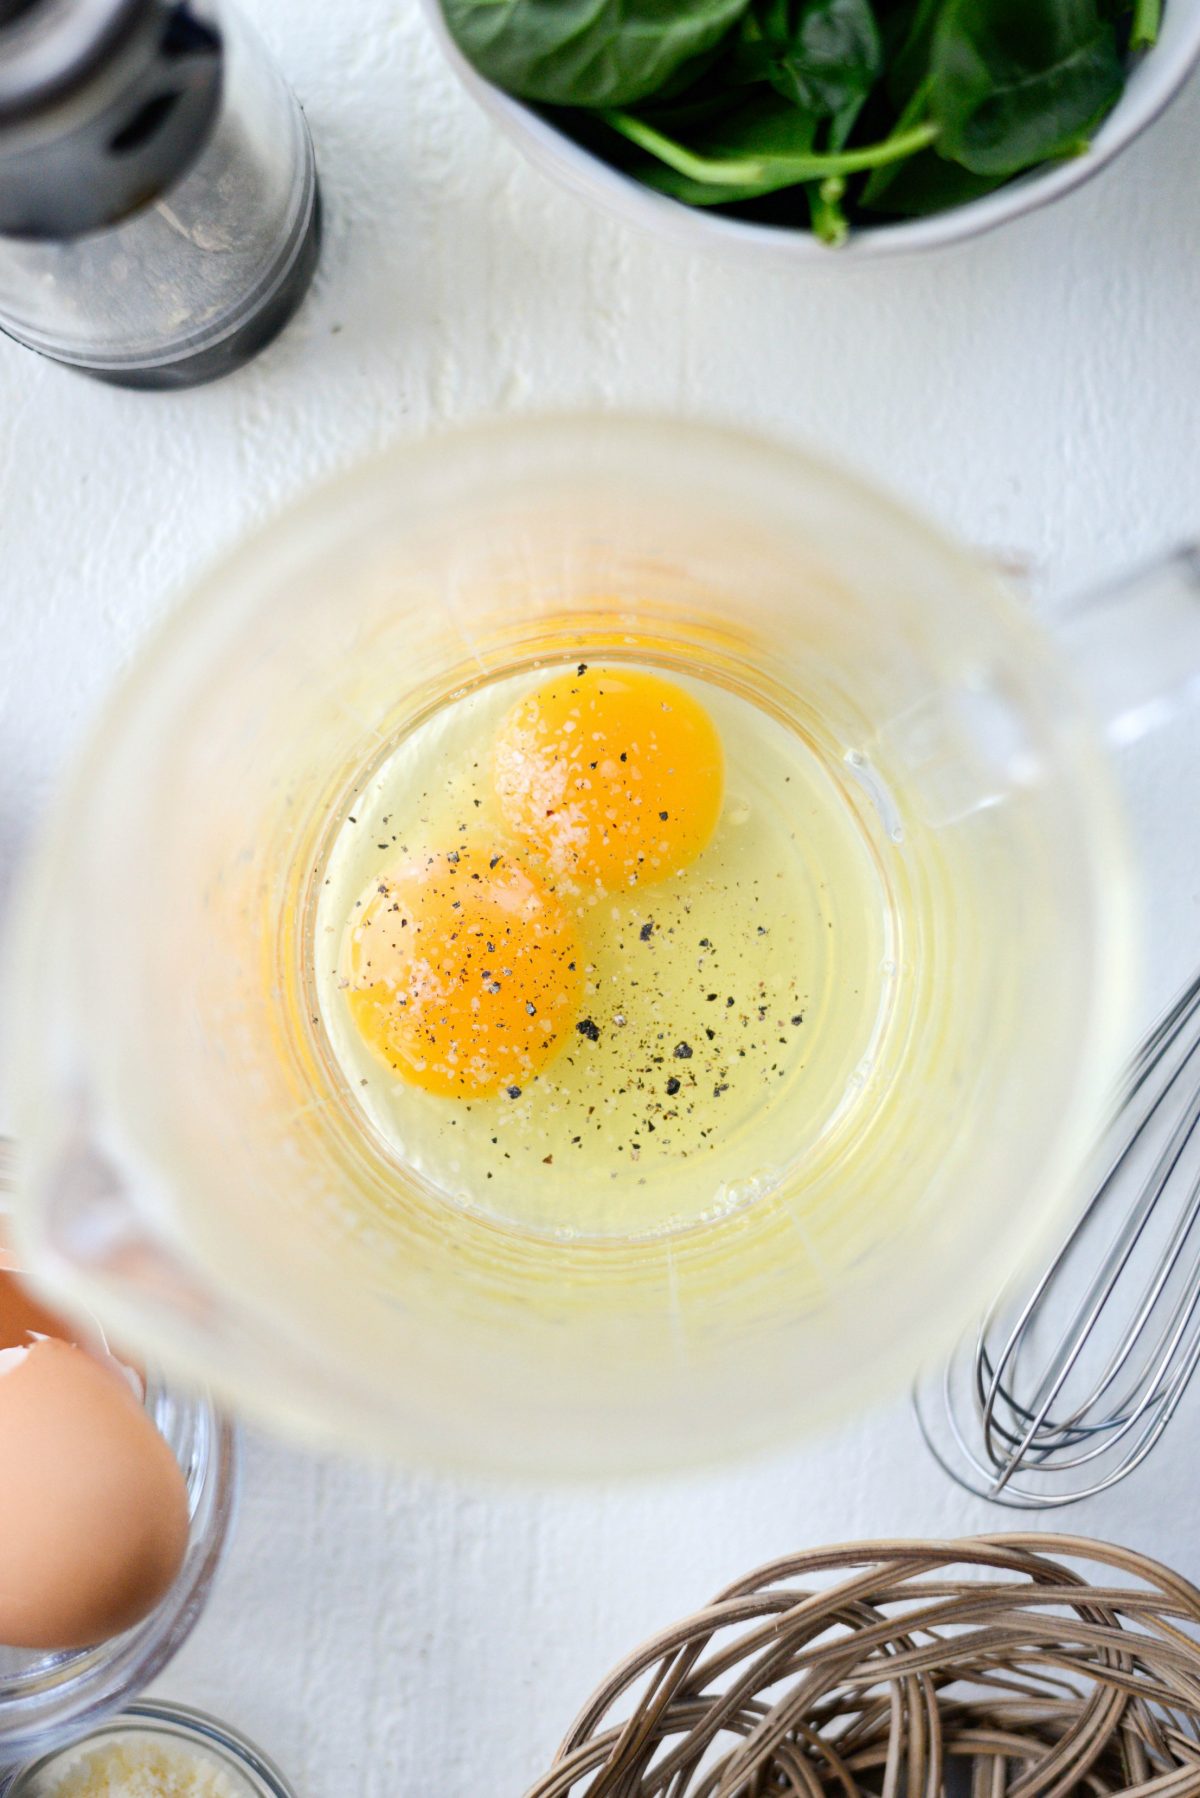 crack eggs into a bowl or liquid measuring cup and season